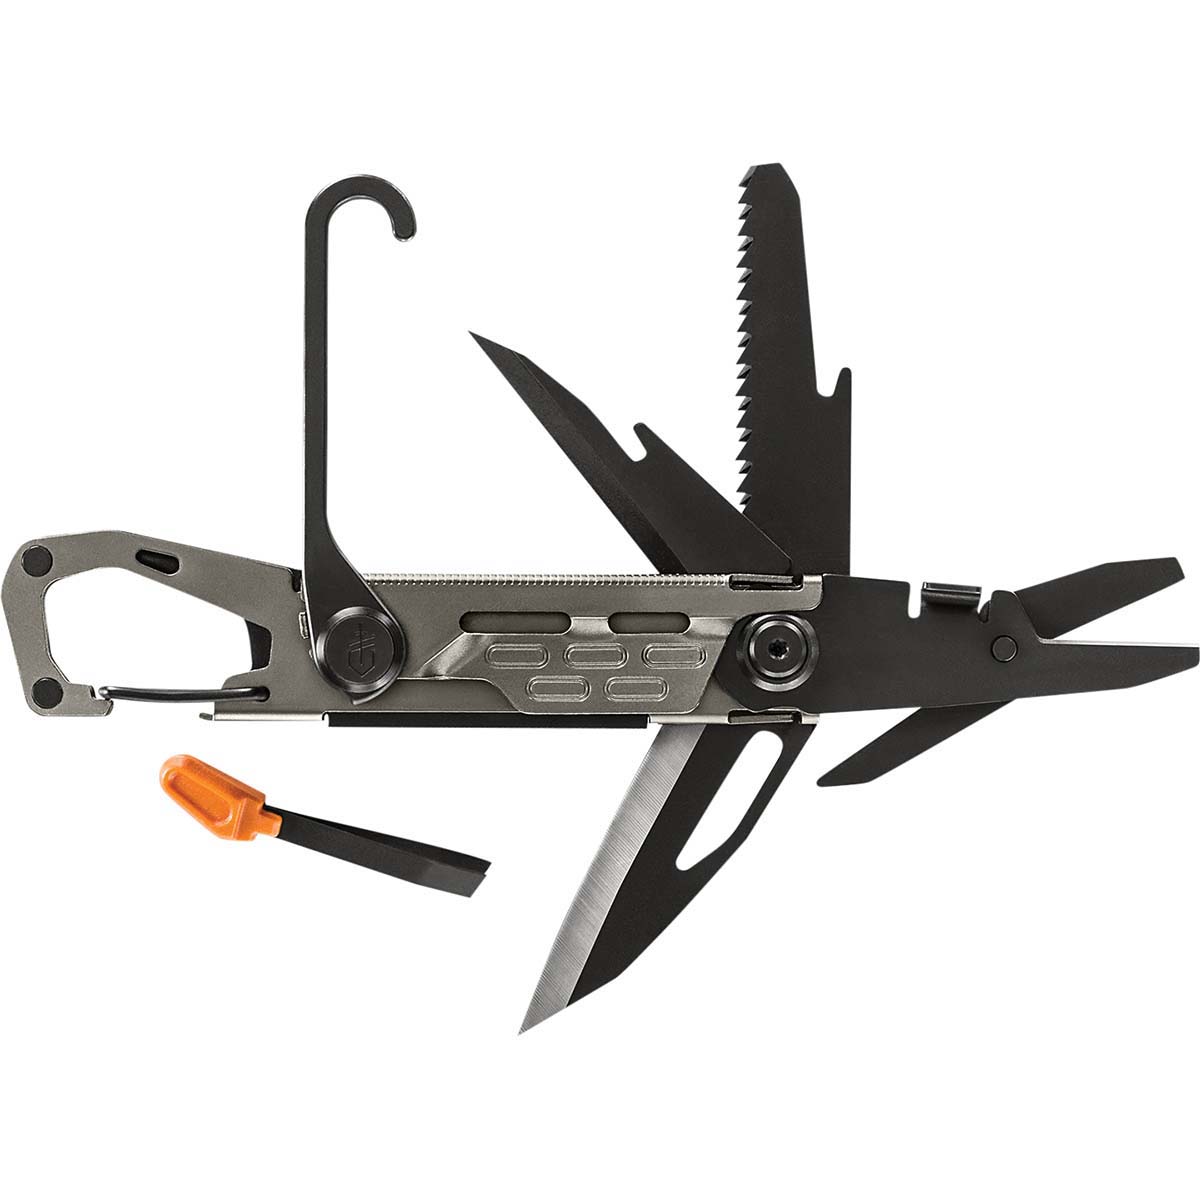 Gerber Stakeout Multi-Tool Graphite